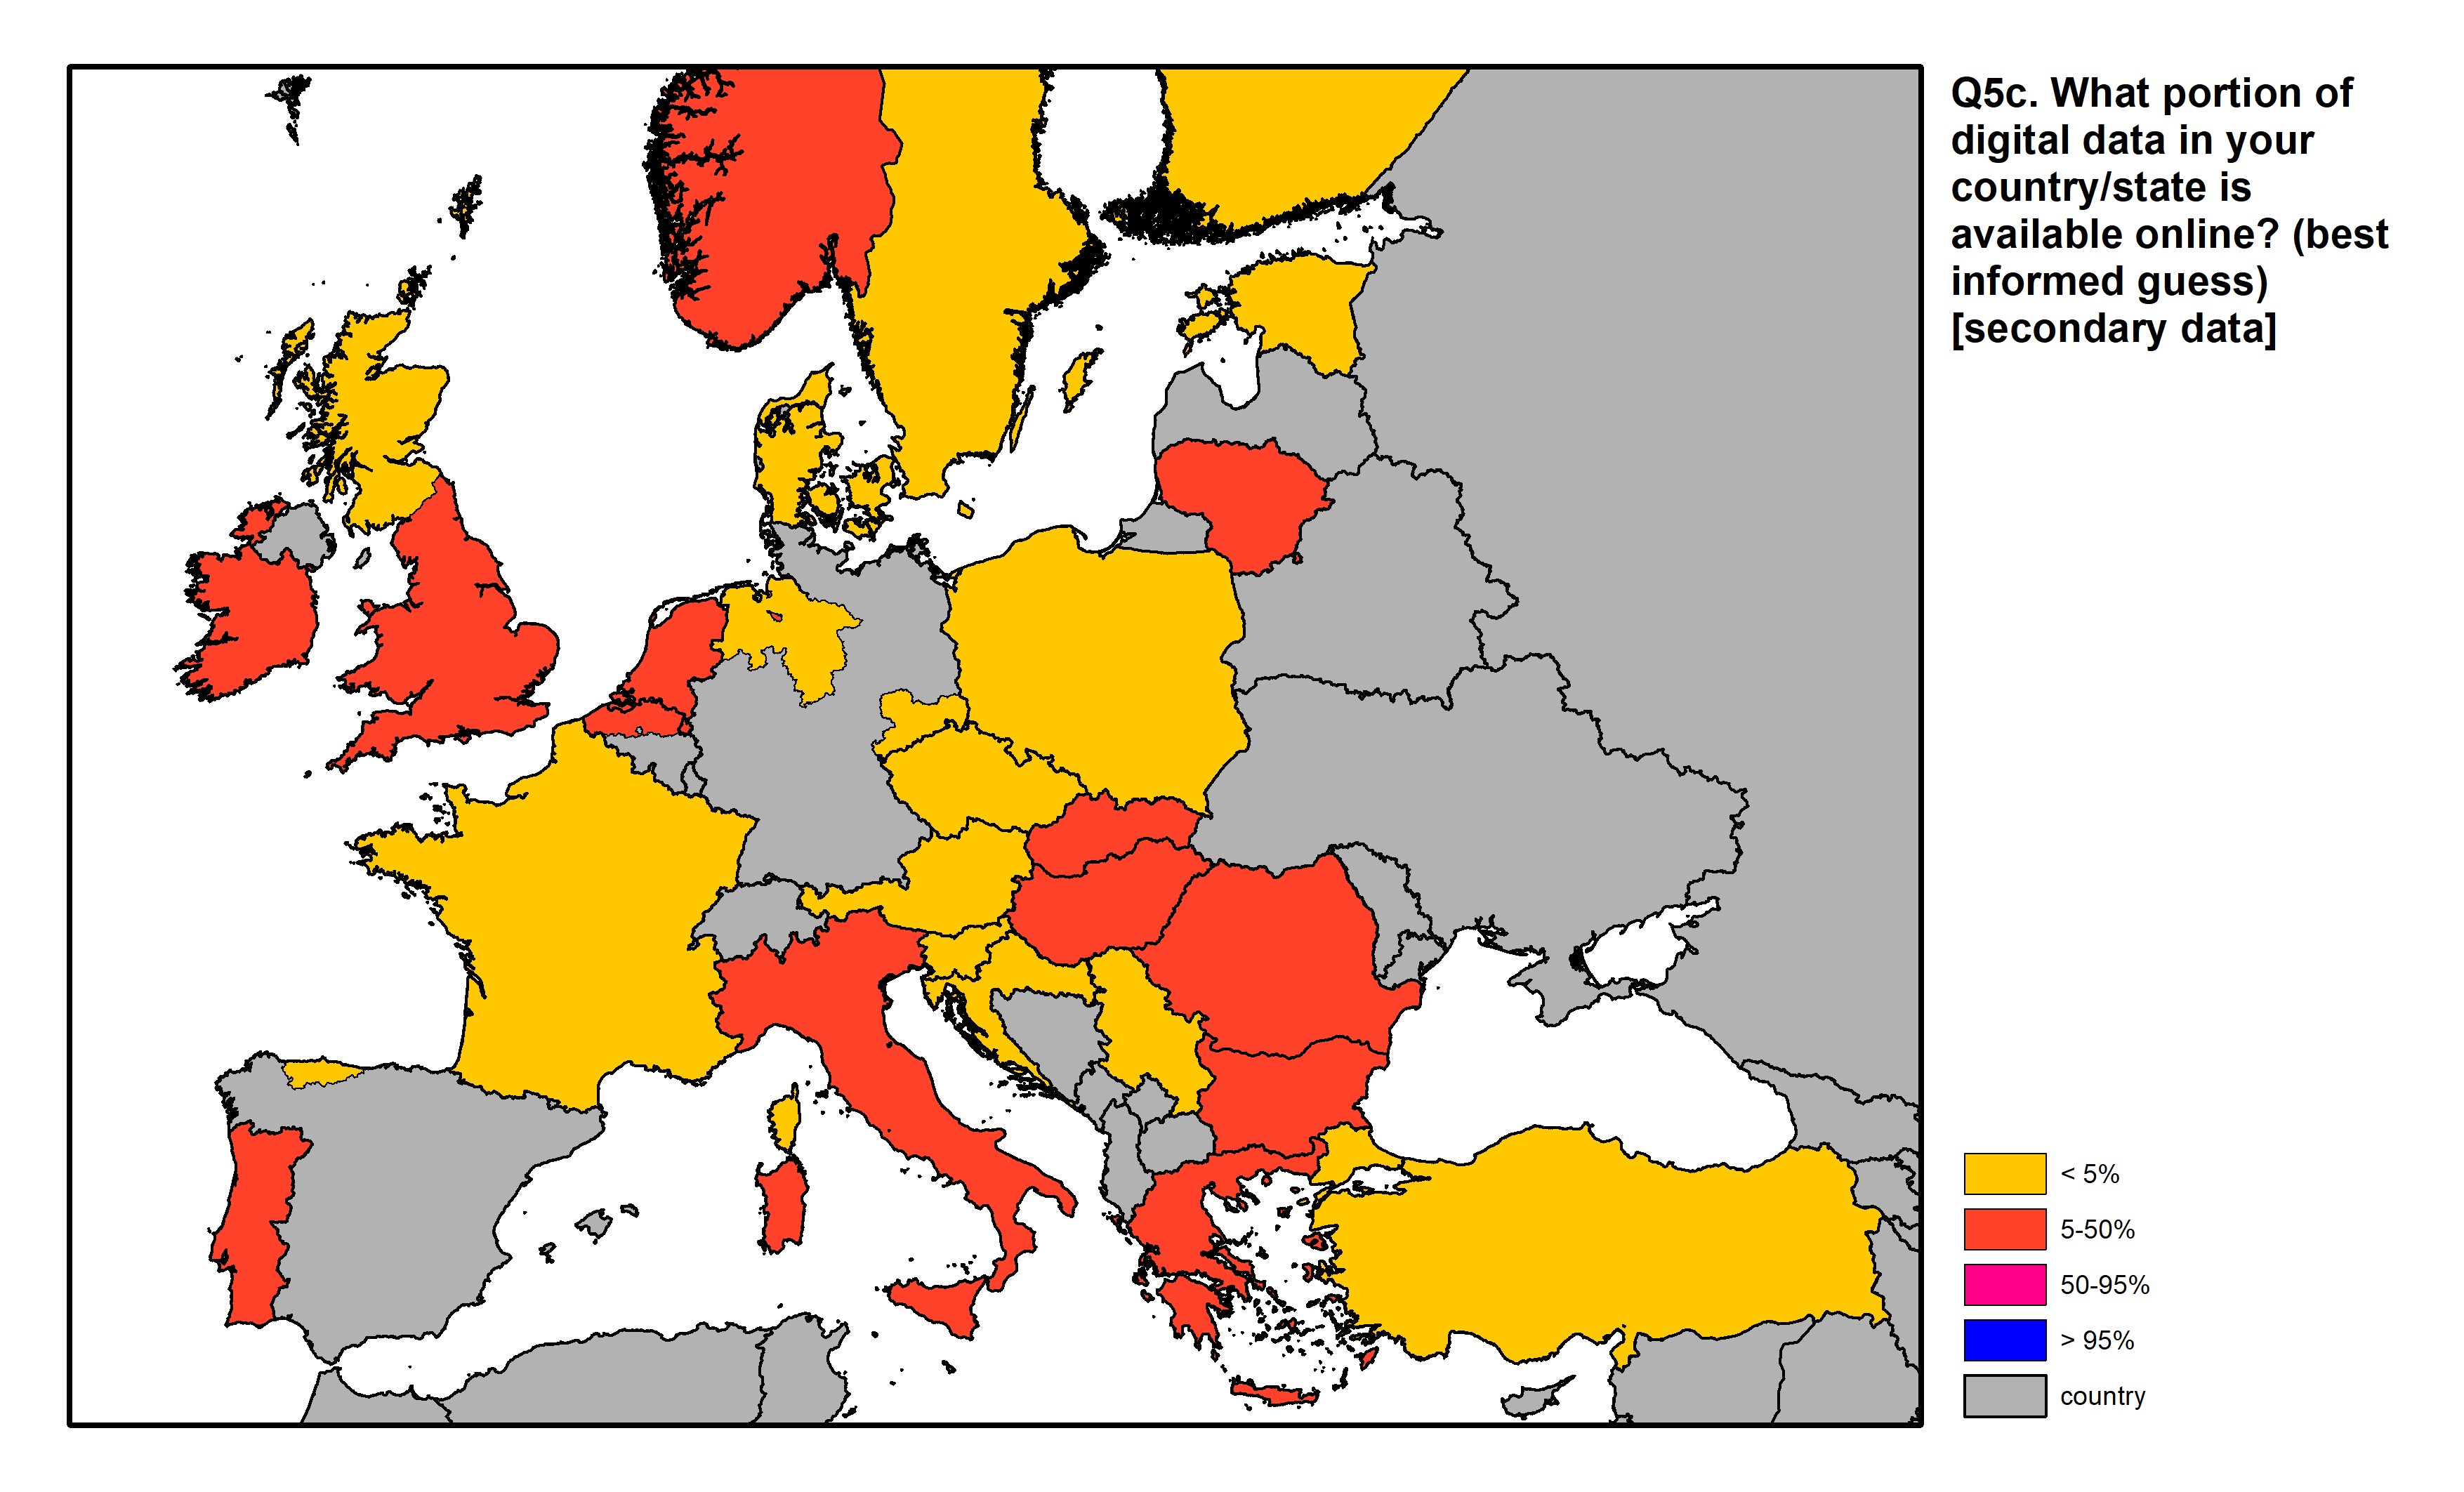 Figure 17: a map of Europe showing countries and regions in colour based on response rates to the survey question.